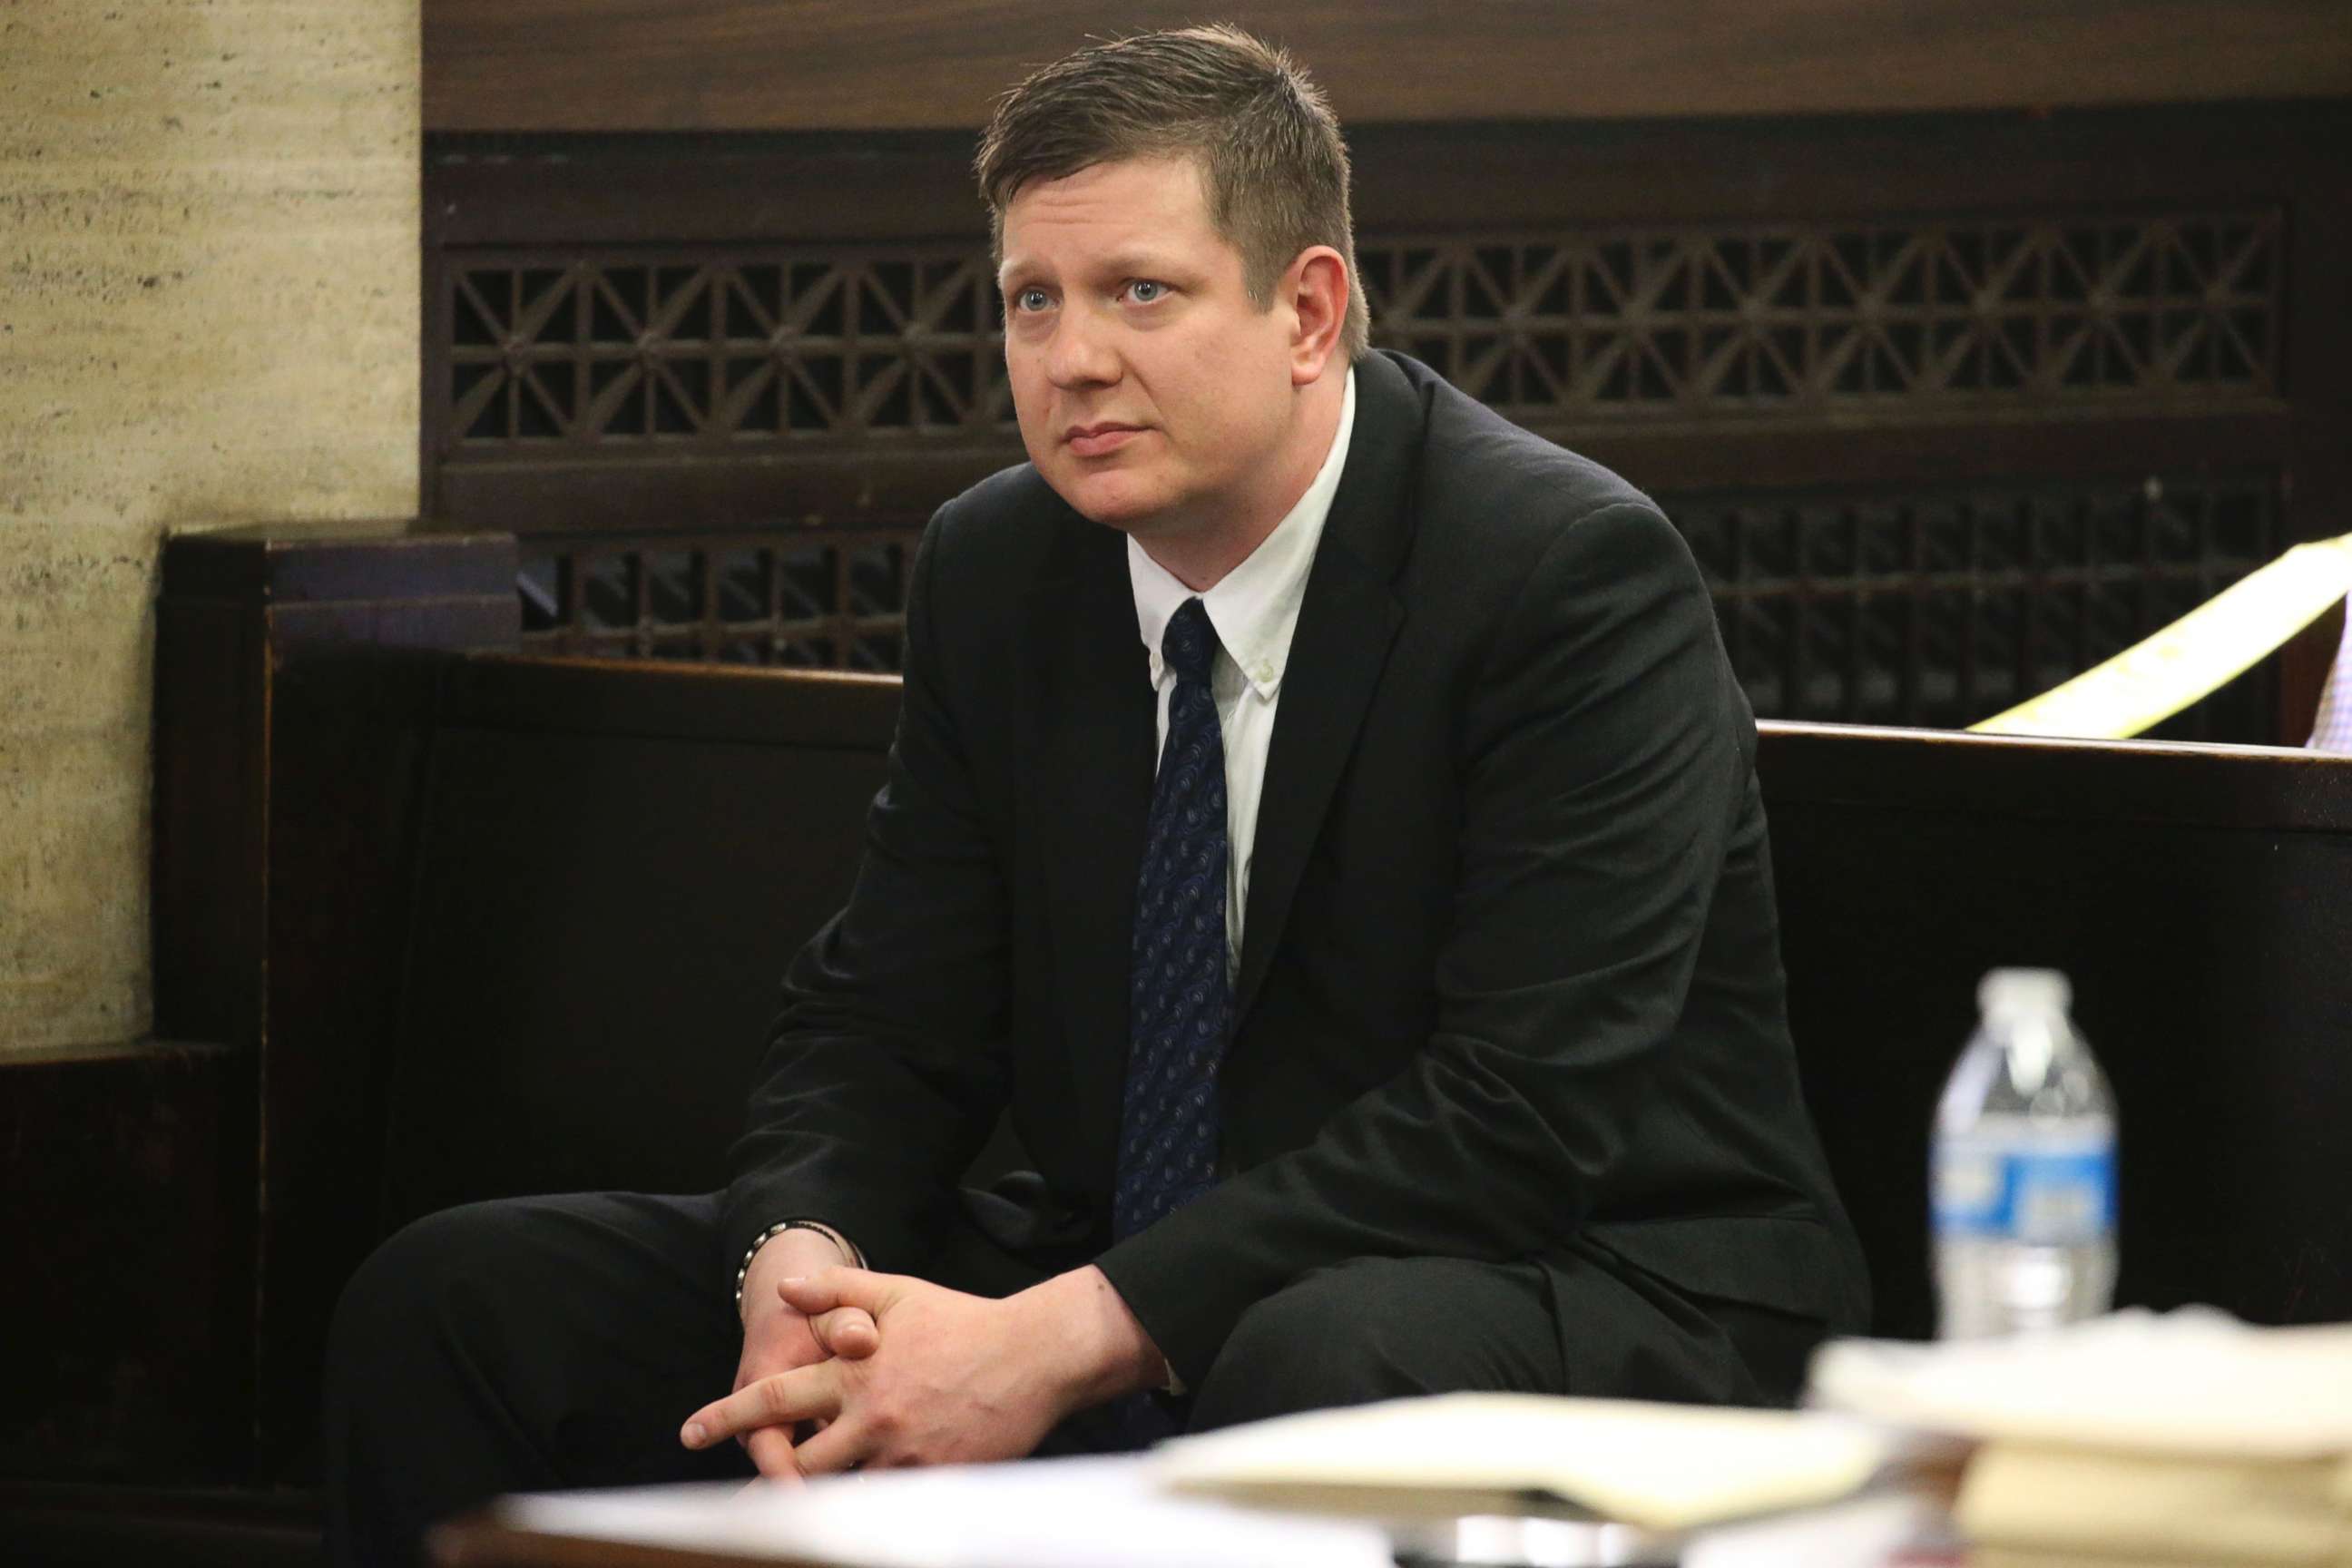 PHOTO: Chicago police Officer Jason Van Dyke attends a hearing for the shooting death of Laquan McDonald at the Leighton Criminal Court Building, in Chicago, May 4, 2018.